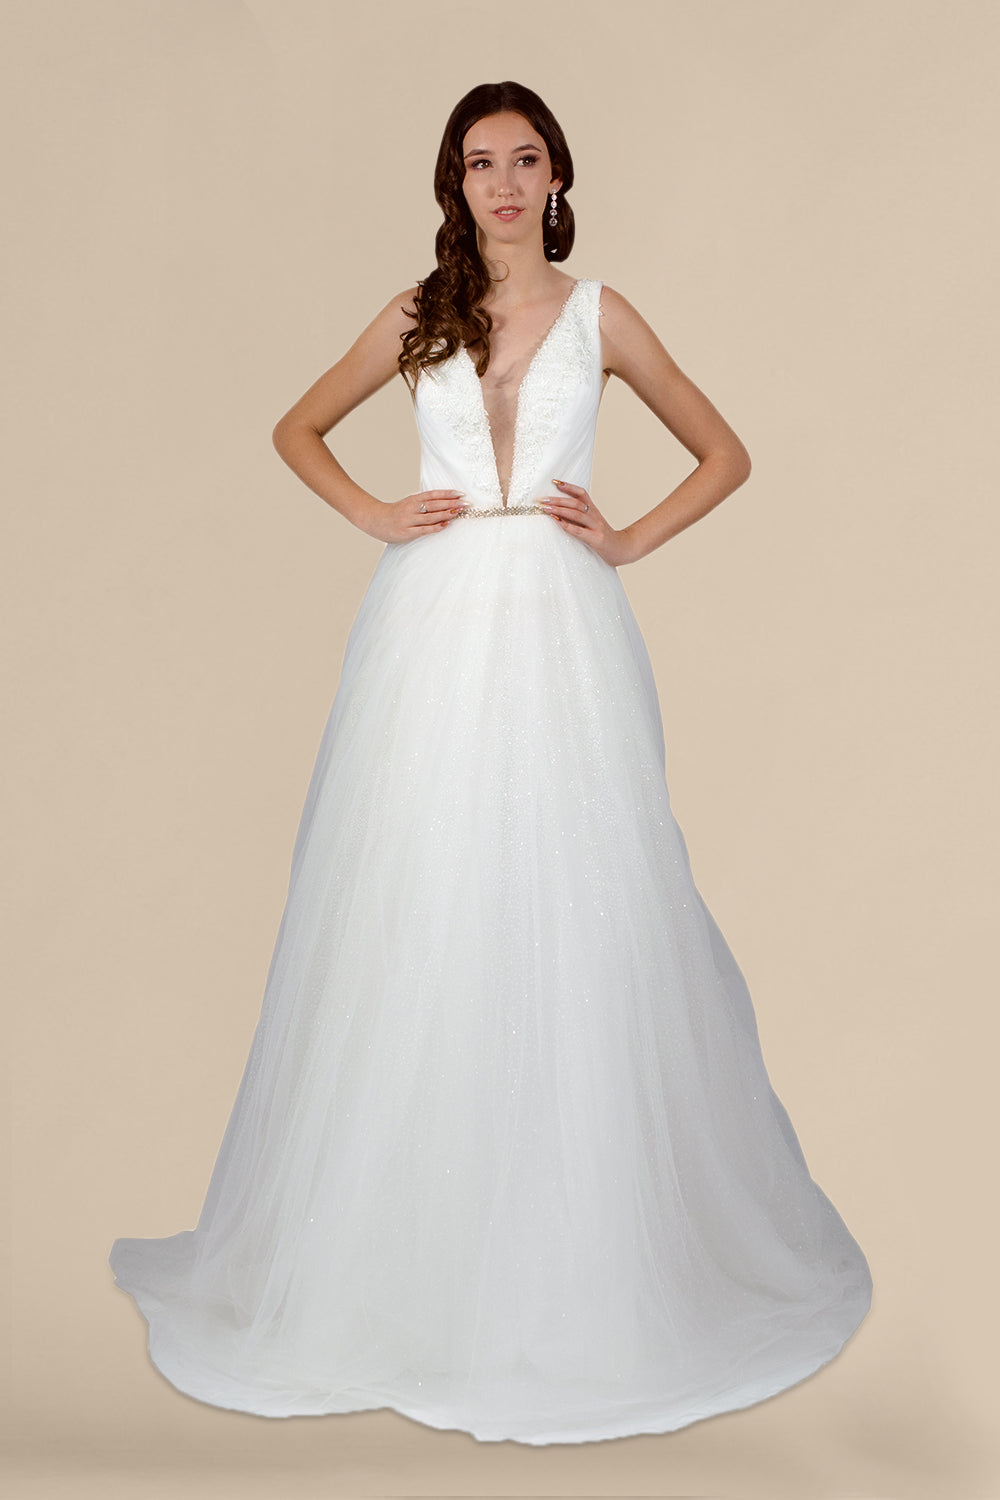 Busty Brides with Structured Gowns- Did You Wear A BRA?